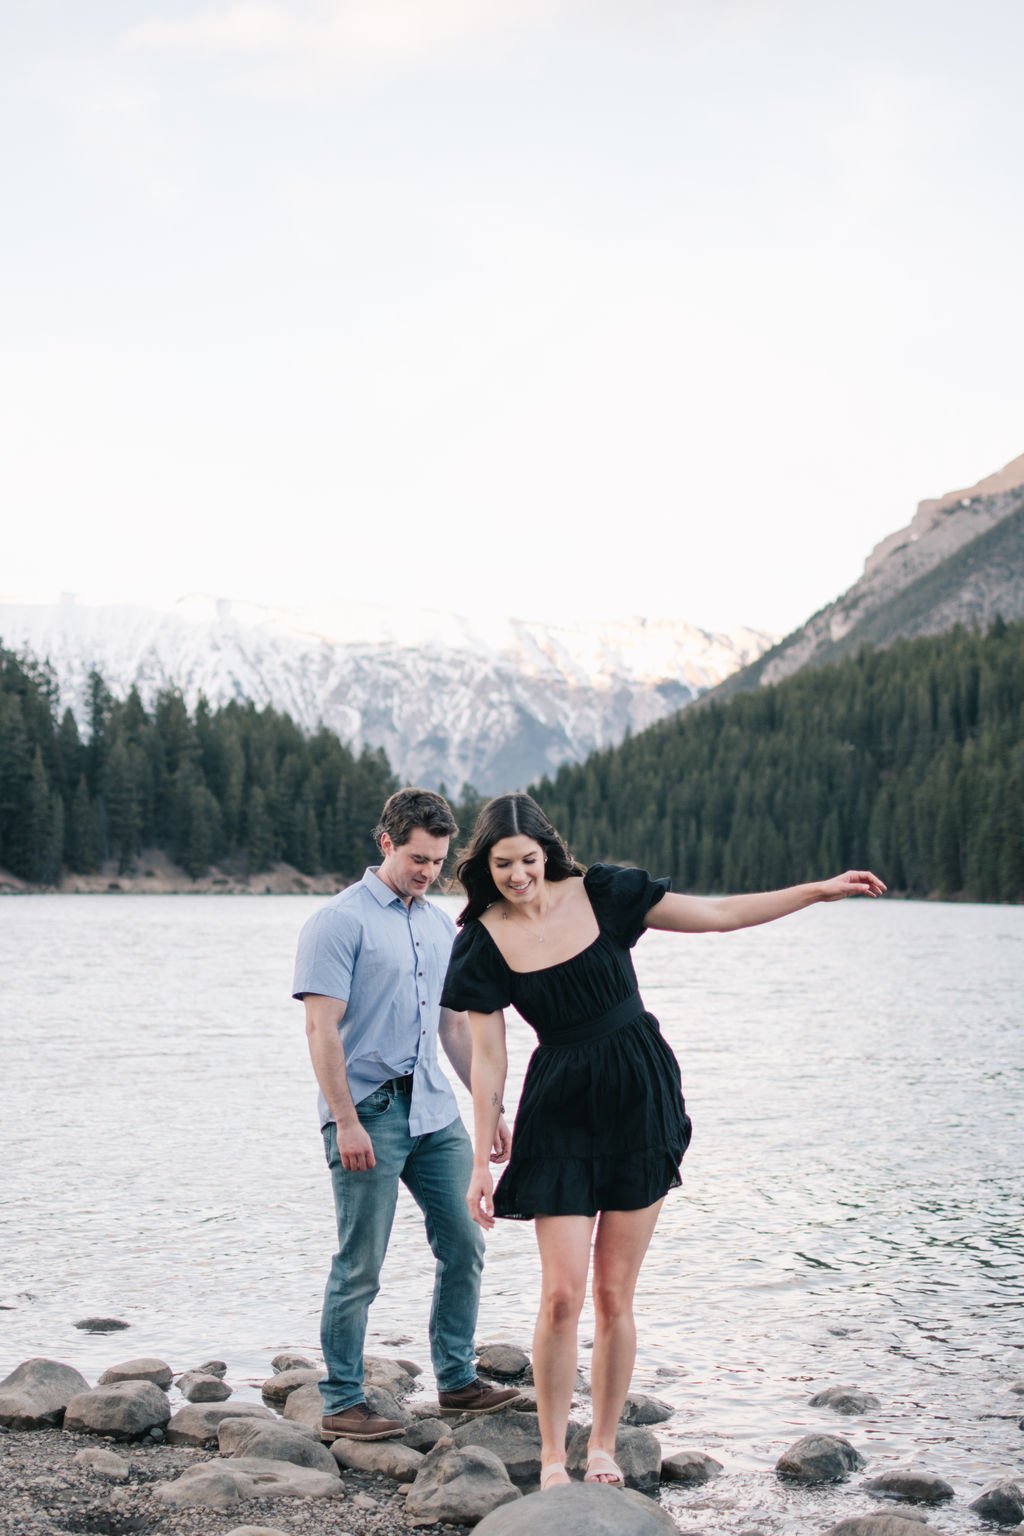 Couple's unforgettable destination engagement session in Banff National Park photographed by Niagara wedding photographers, Ugo Photography